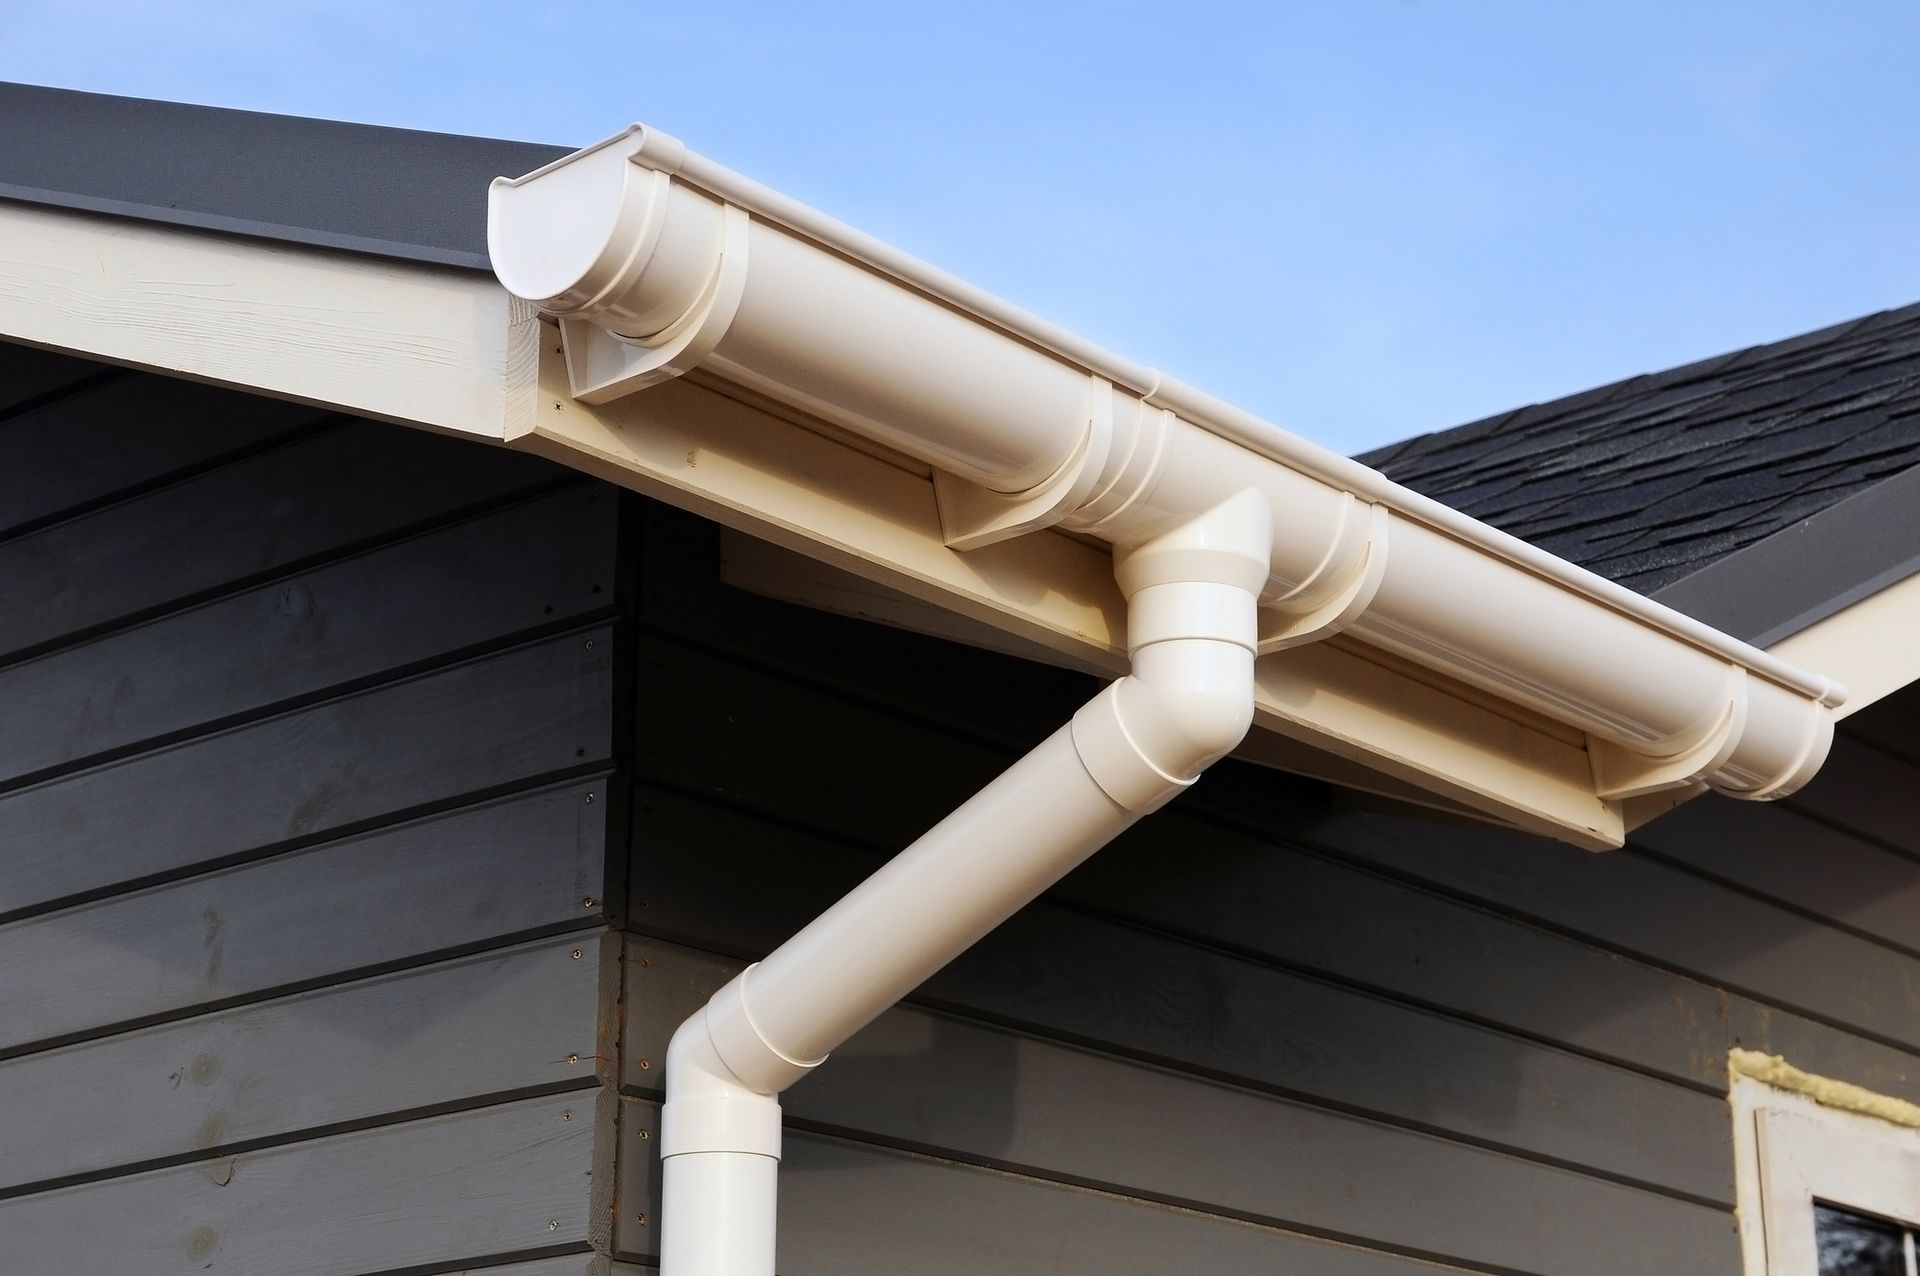 Protect Your Home with Rain Gutters